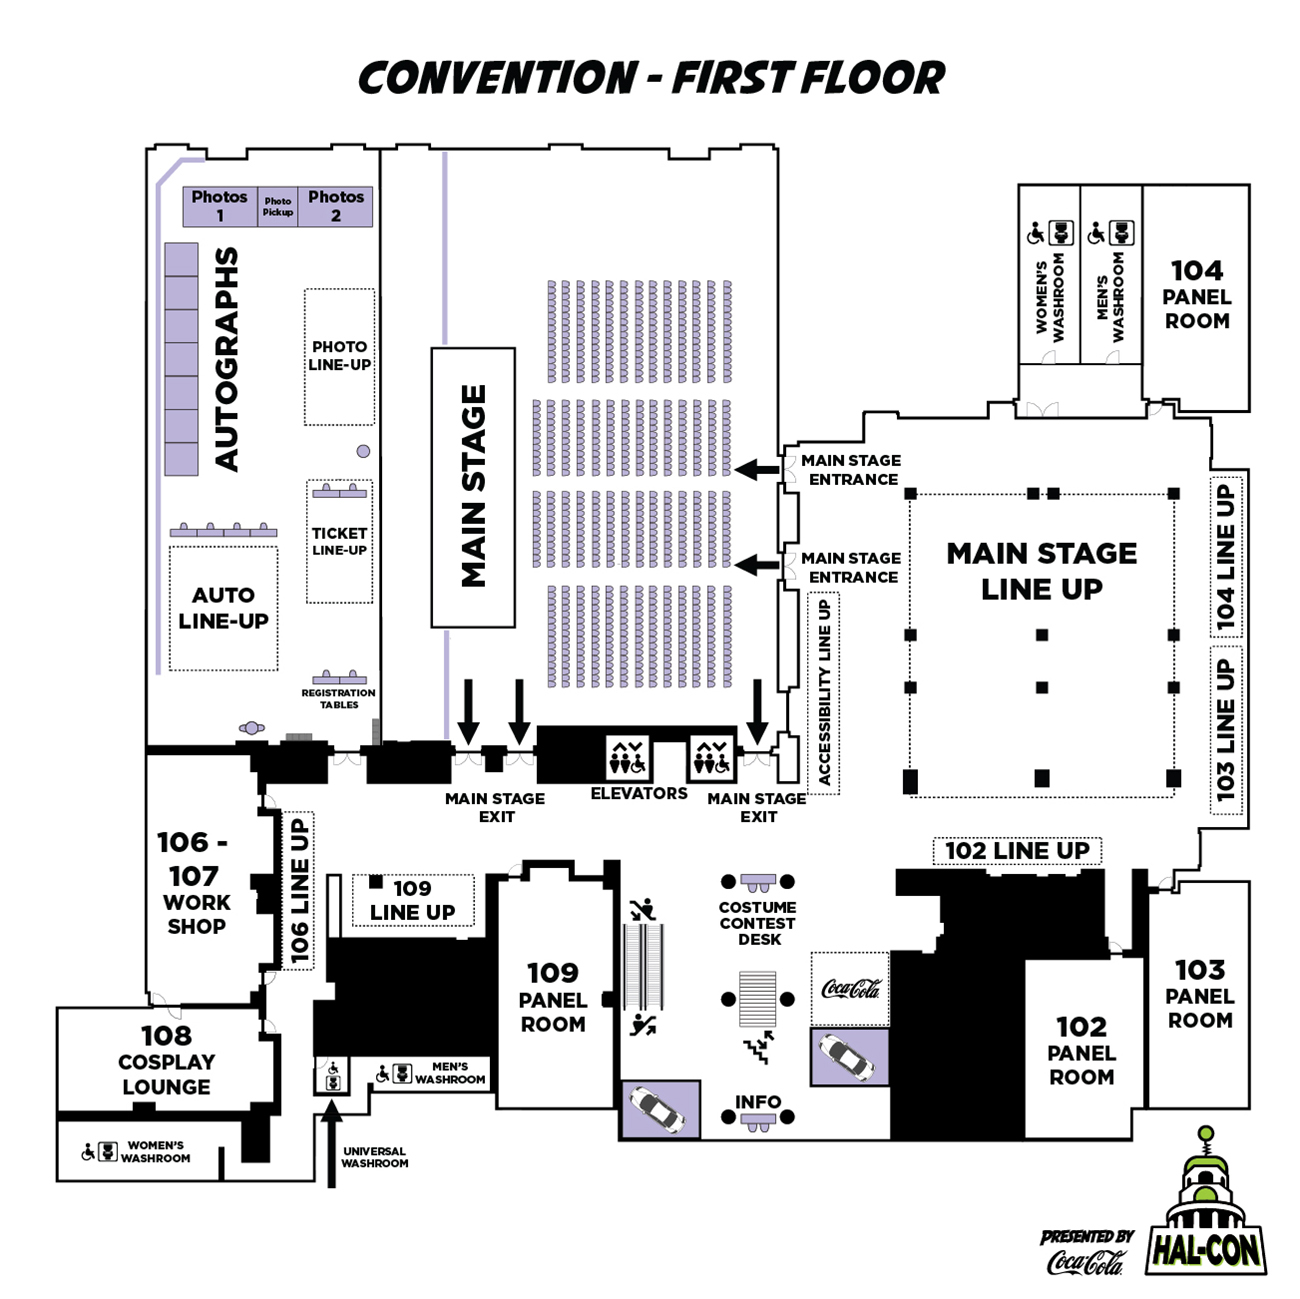 Map of the First Floor